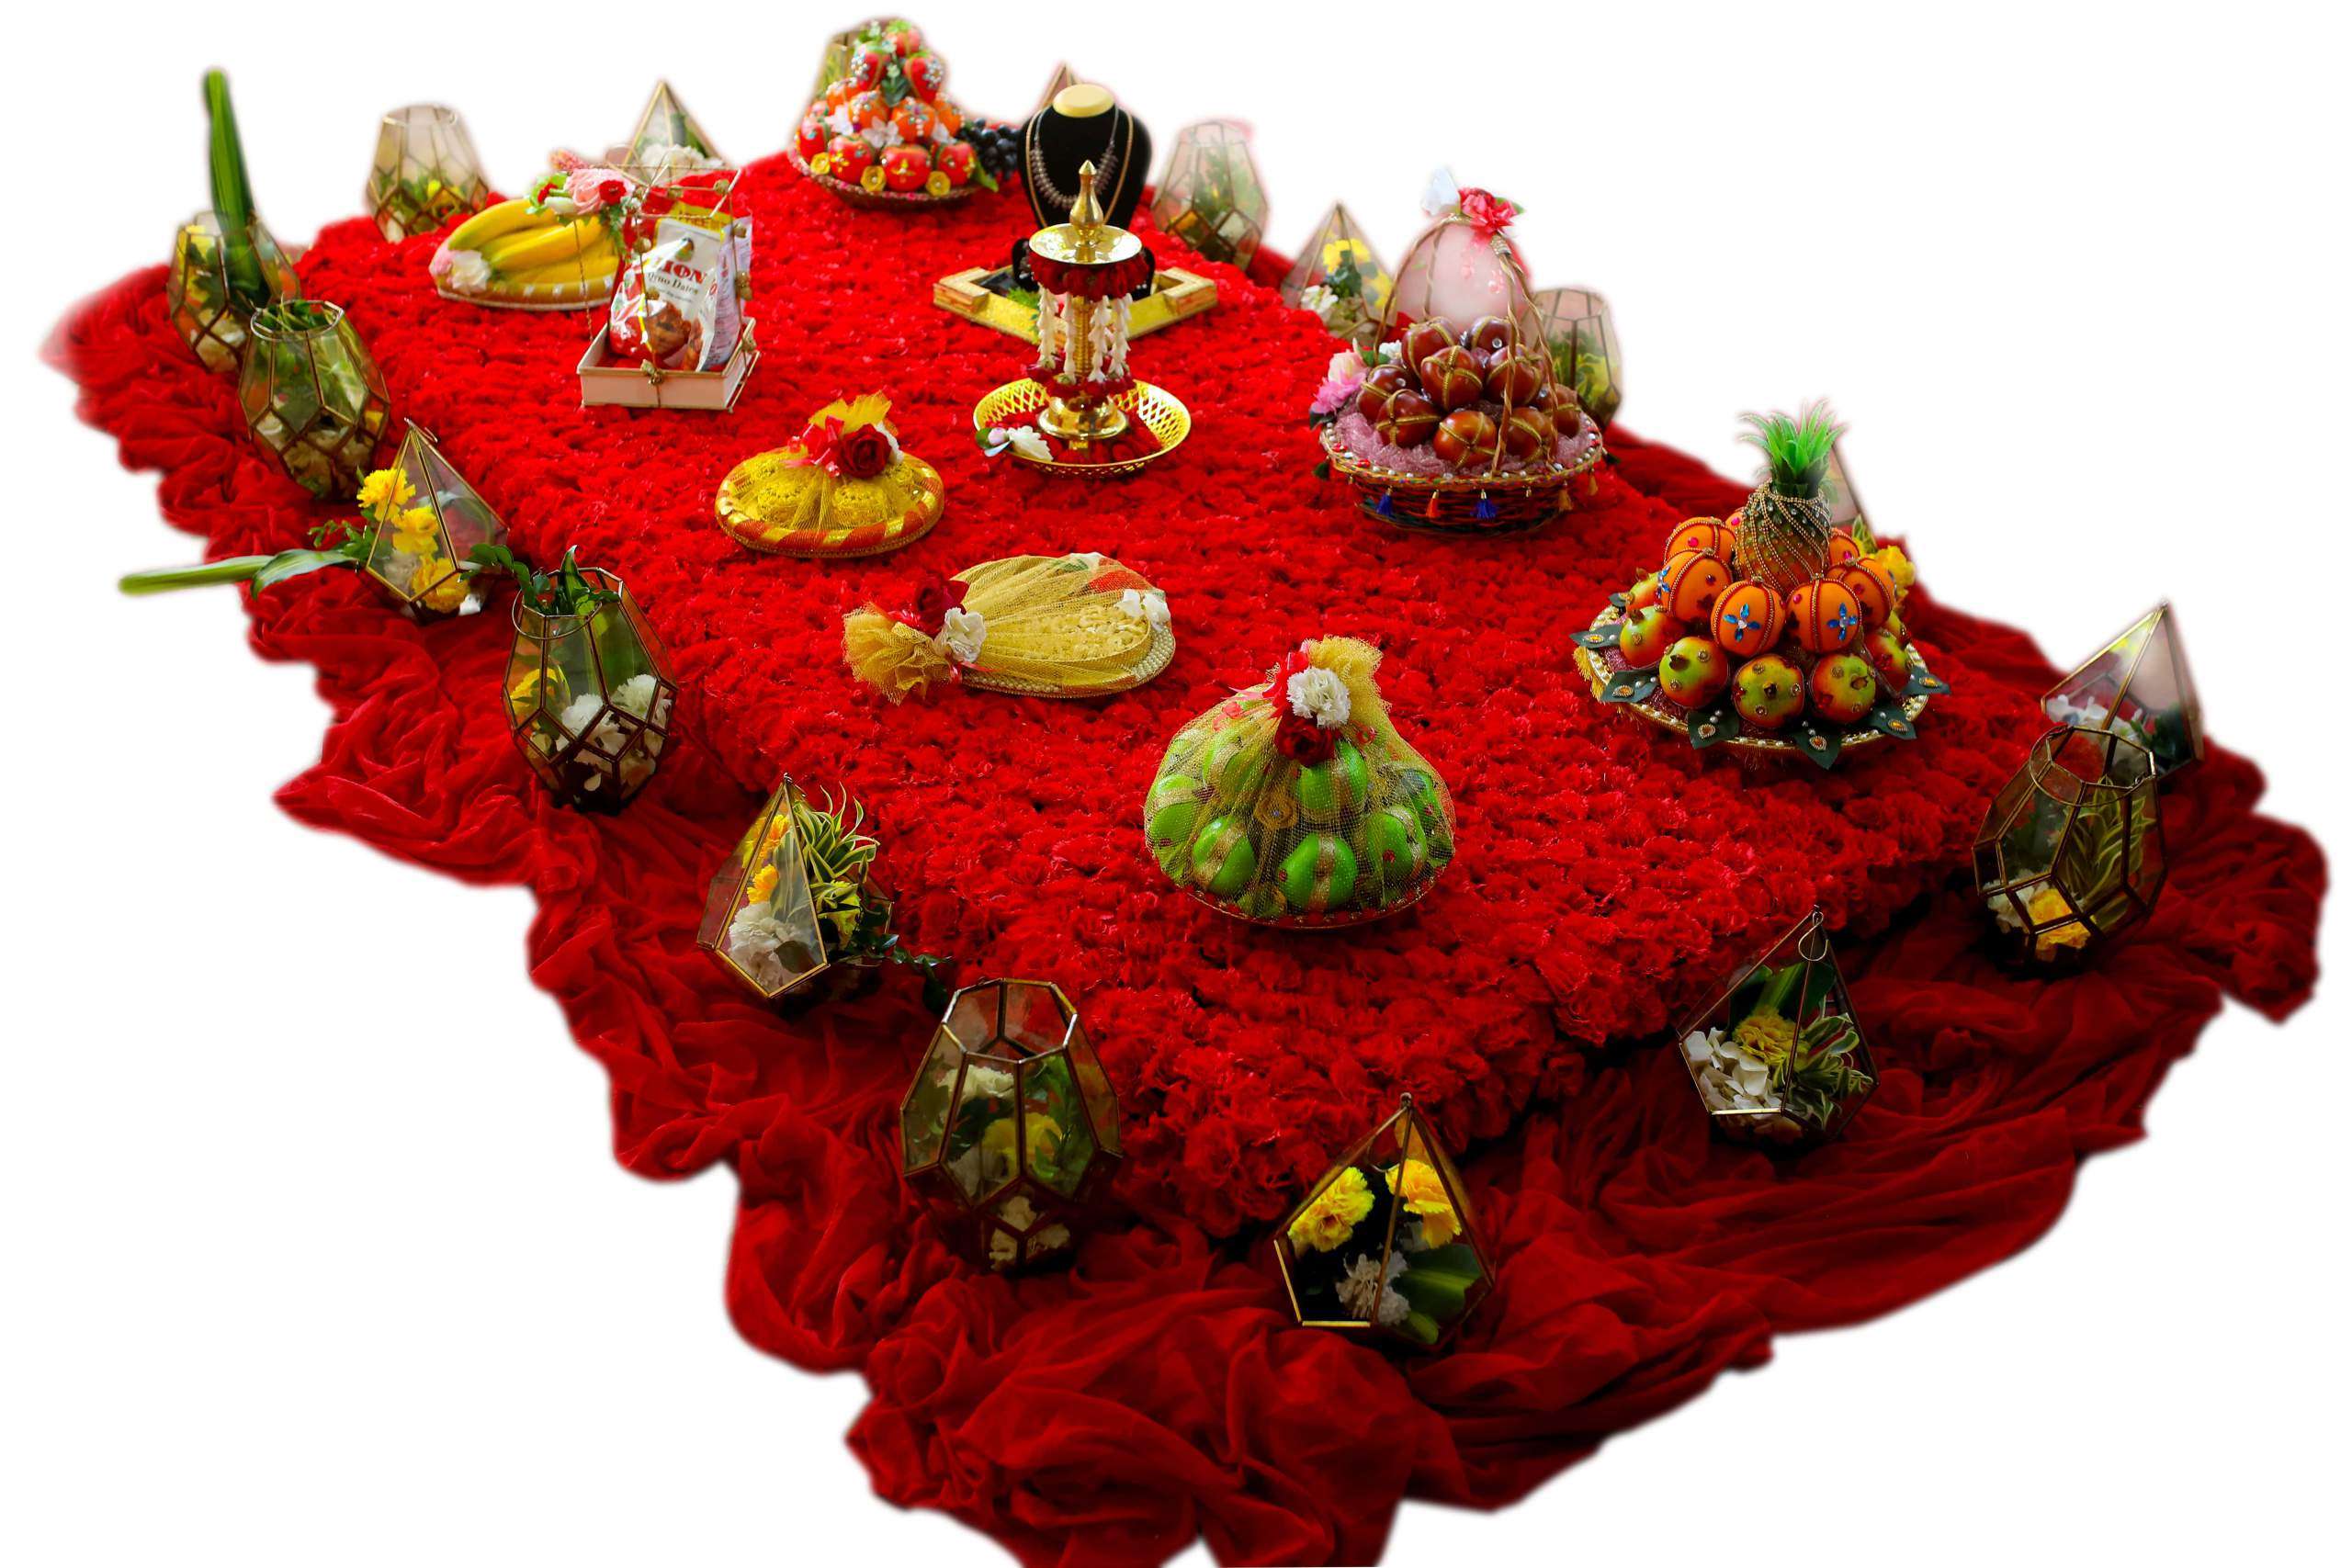 seer-varisai-plates-red-rose-bed-theme